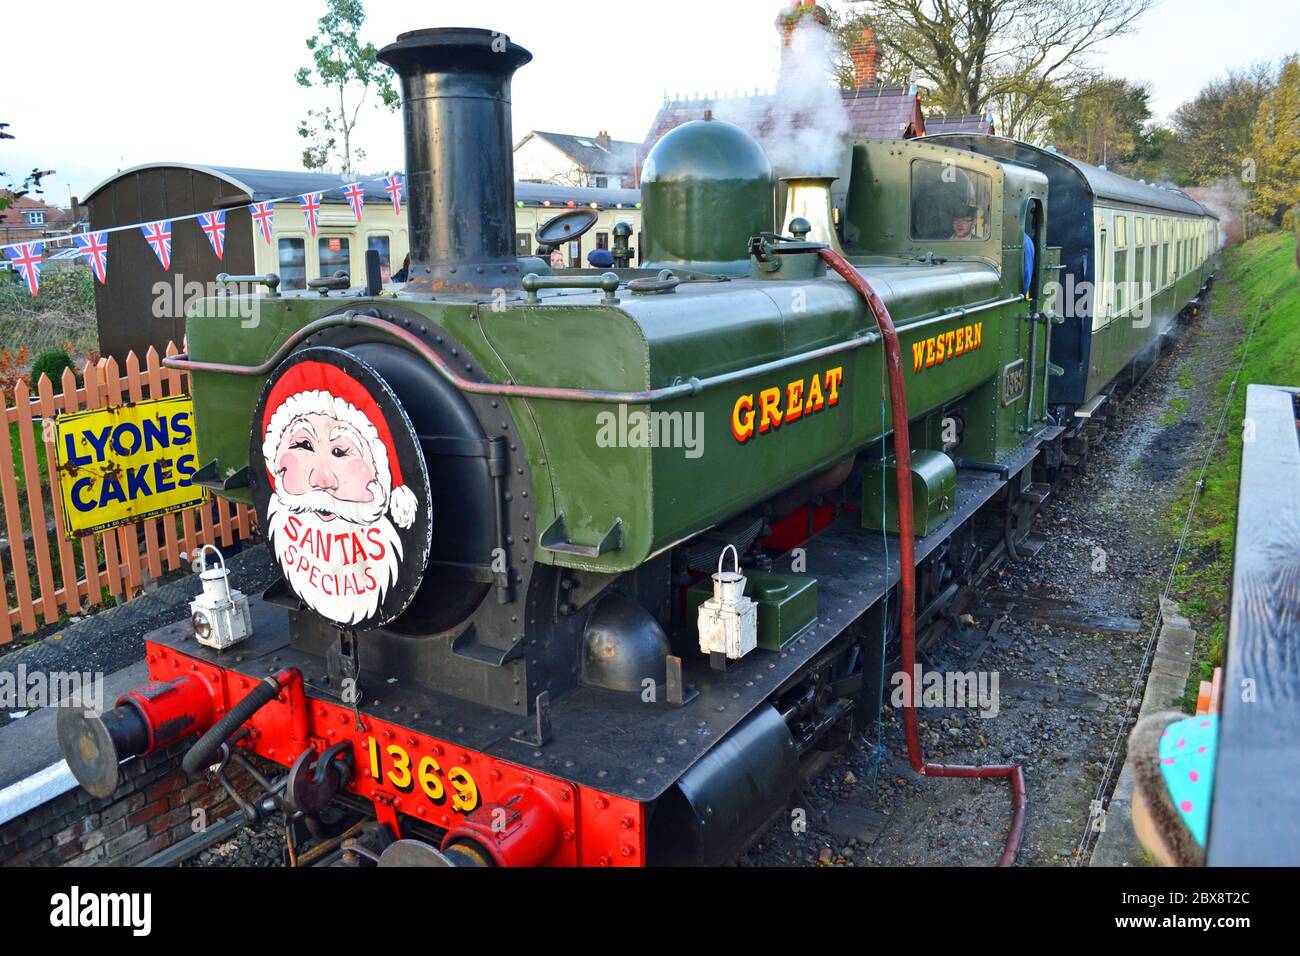 Chinnor and Princes Risborough Railway in winter, running Santa Specials from Chinnor Station. Chinnor, Oxfordshire, UK Stock Photo